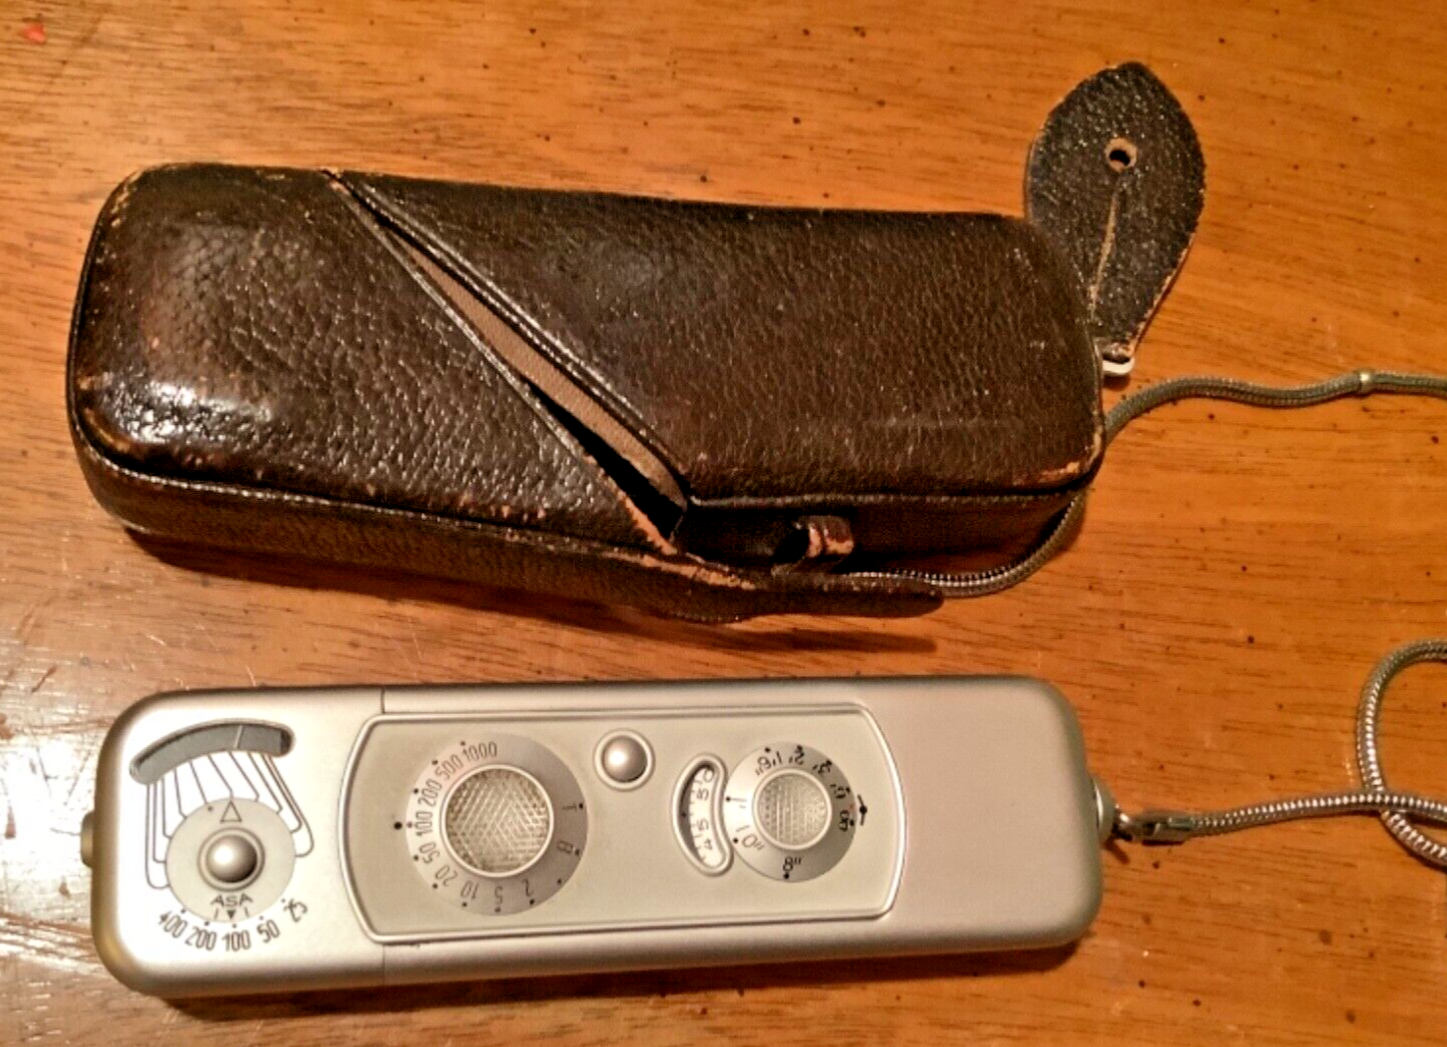 Vintage Minox B Subminiature Spy Camera 1:3.5 f=15mm - Silver with case